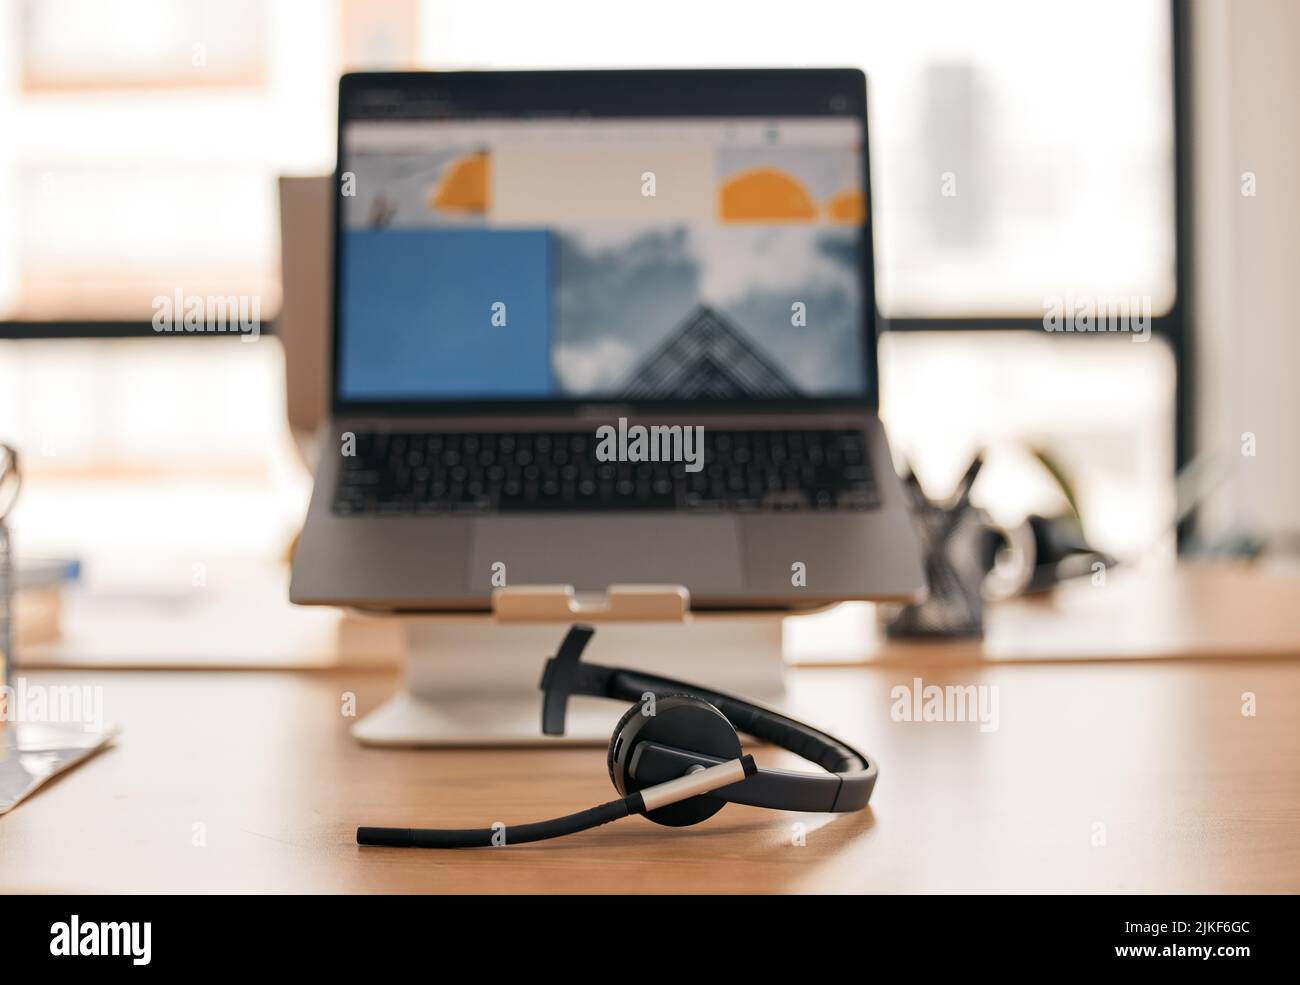 All set up and ready to help. Still life shot of a wireless headset on a desk in a call center. Stock Photo